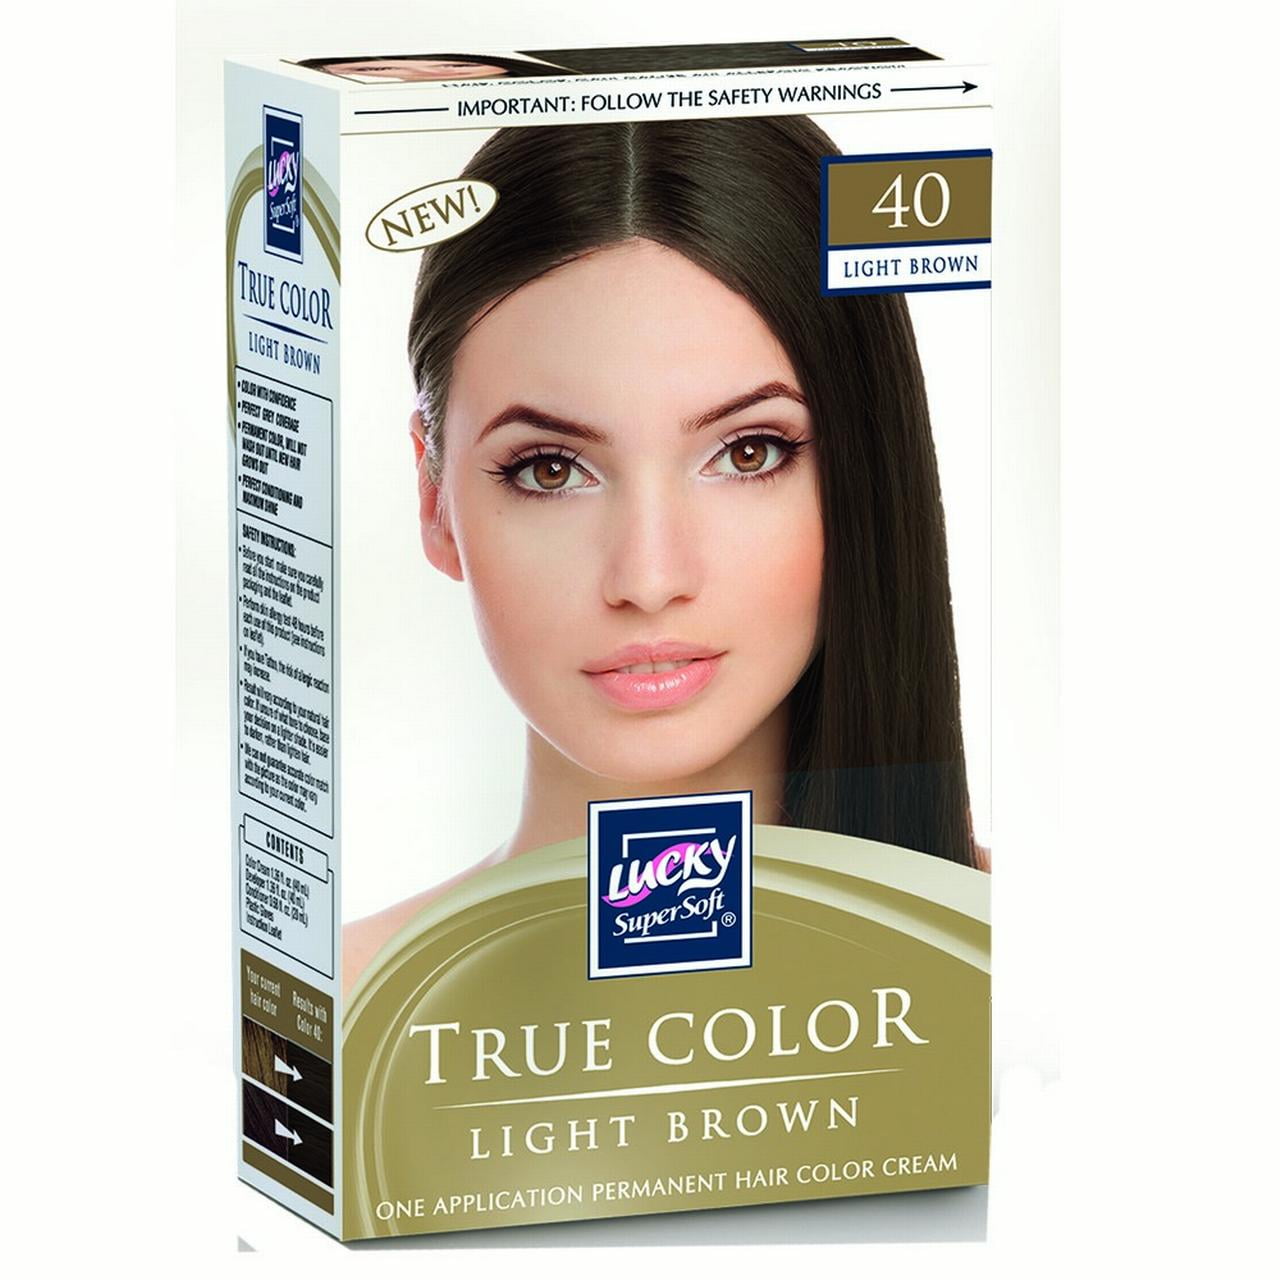 Lucky Super Soft Hair Color, Light Brown